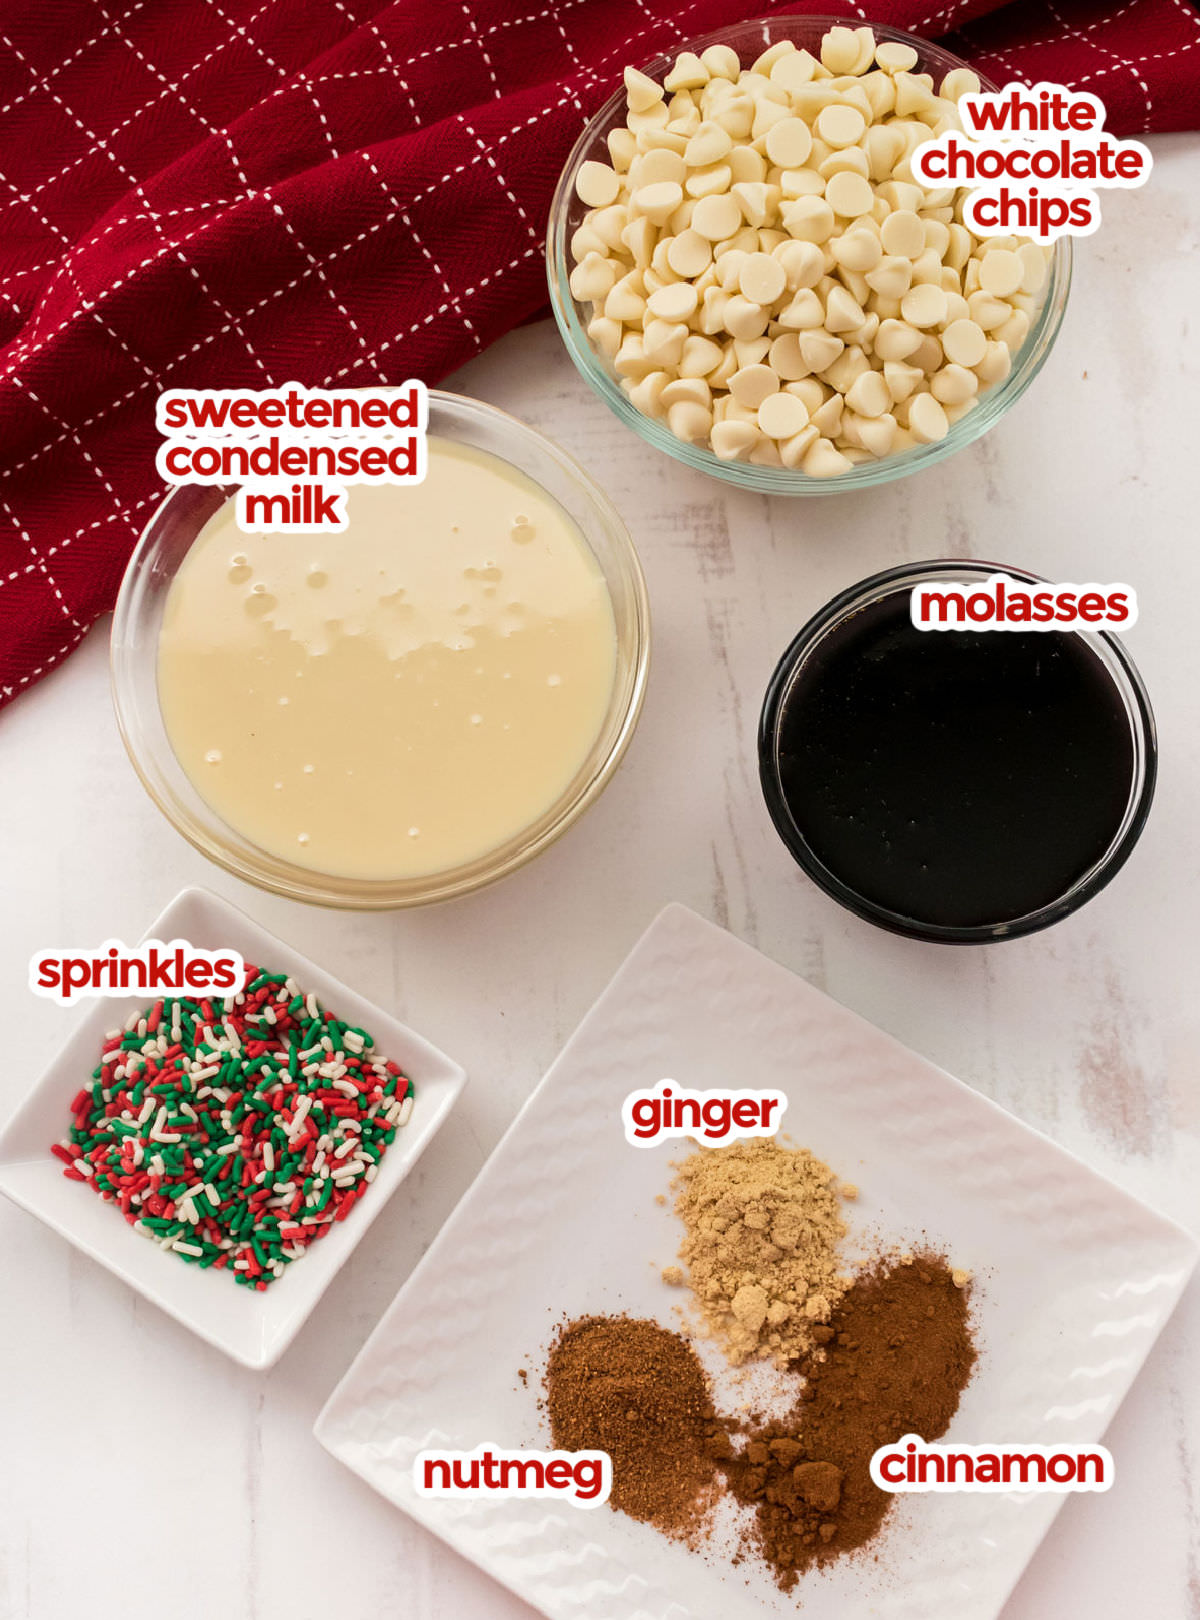 All the ingredients you will need to make Gingerbread Fudge including White Chocolate Chips, Sweetened Condensed Milk, Molasses, Ginger, Nutmeg and Cinnamon. 